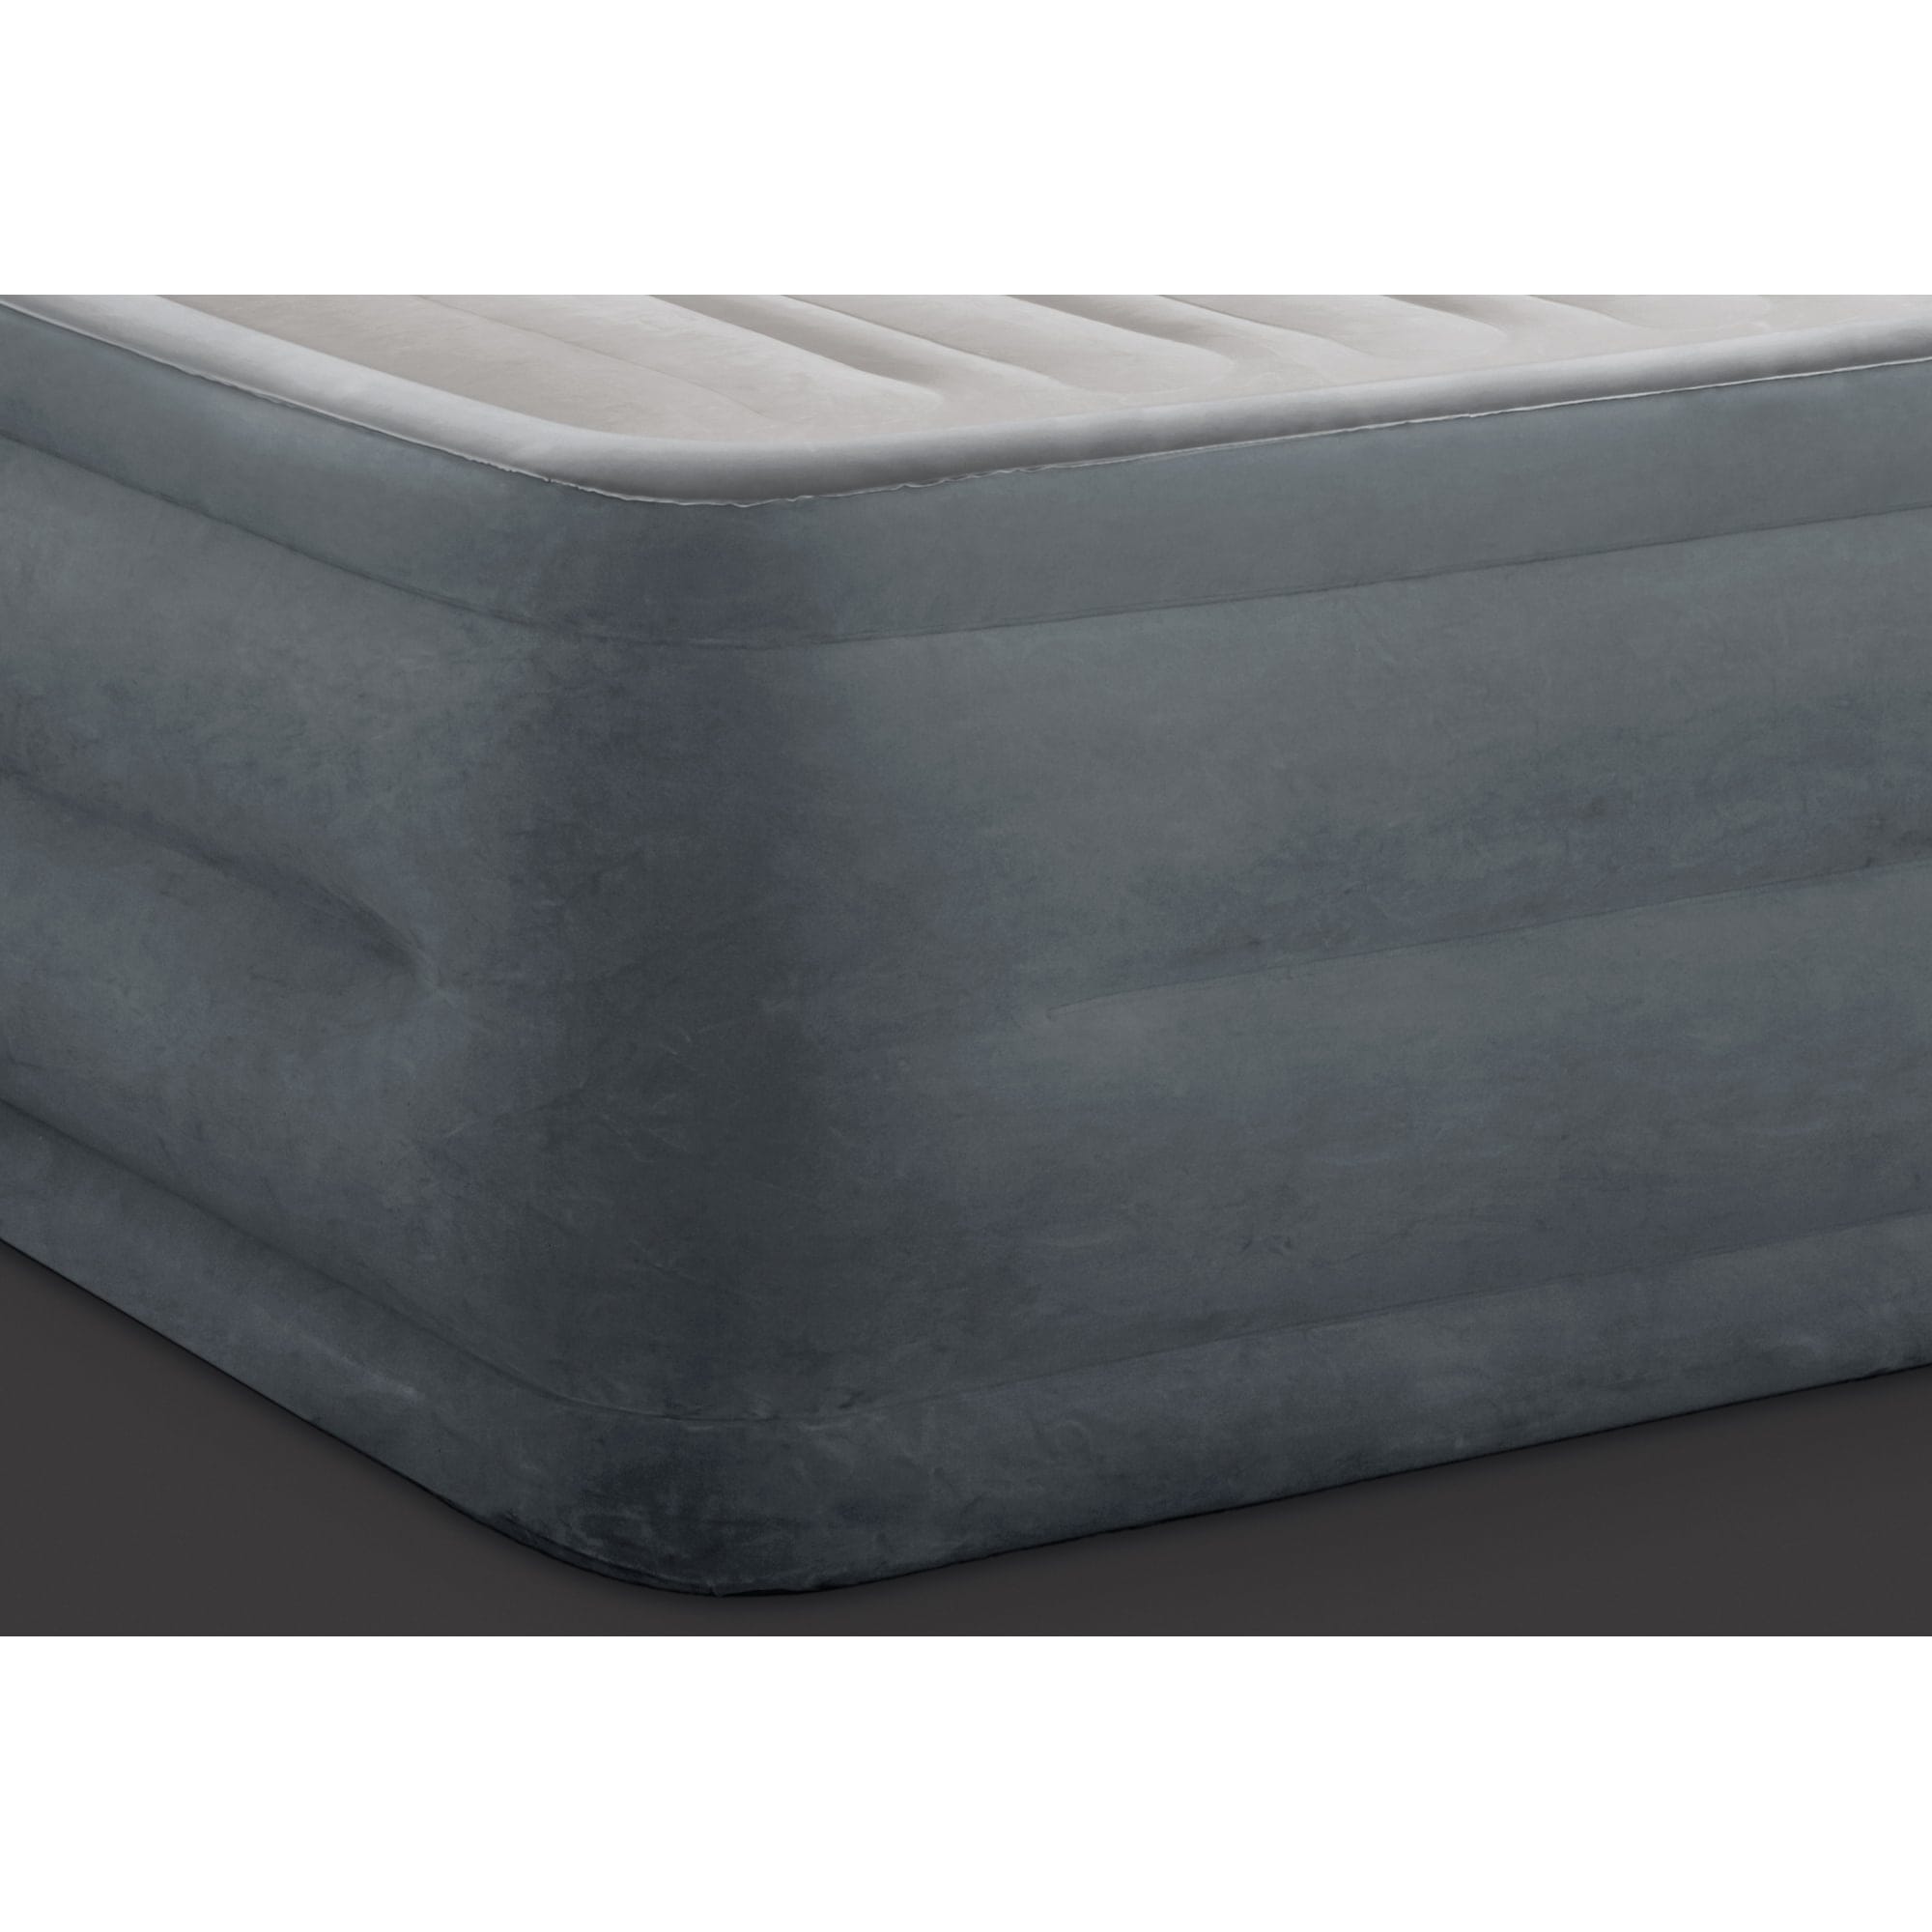 Intex Comfort Plush Queen Air Bed with Built-in Pump, Grey $100.00 EACH, CASE PACK OF 2